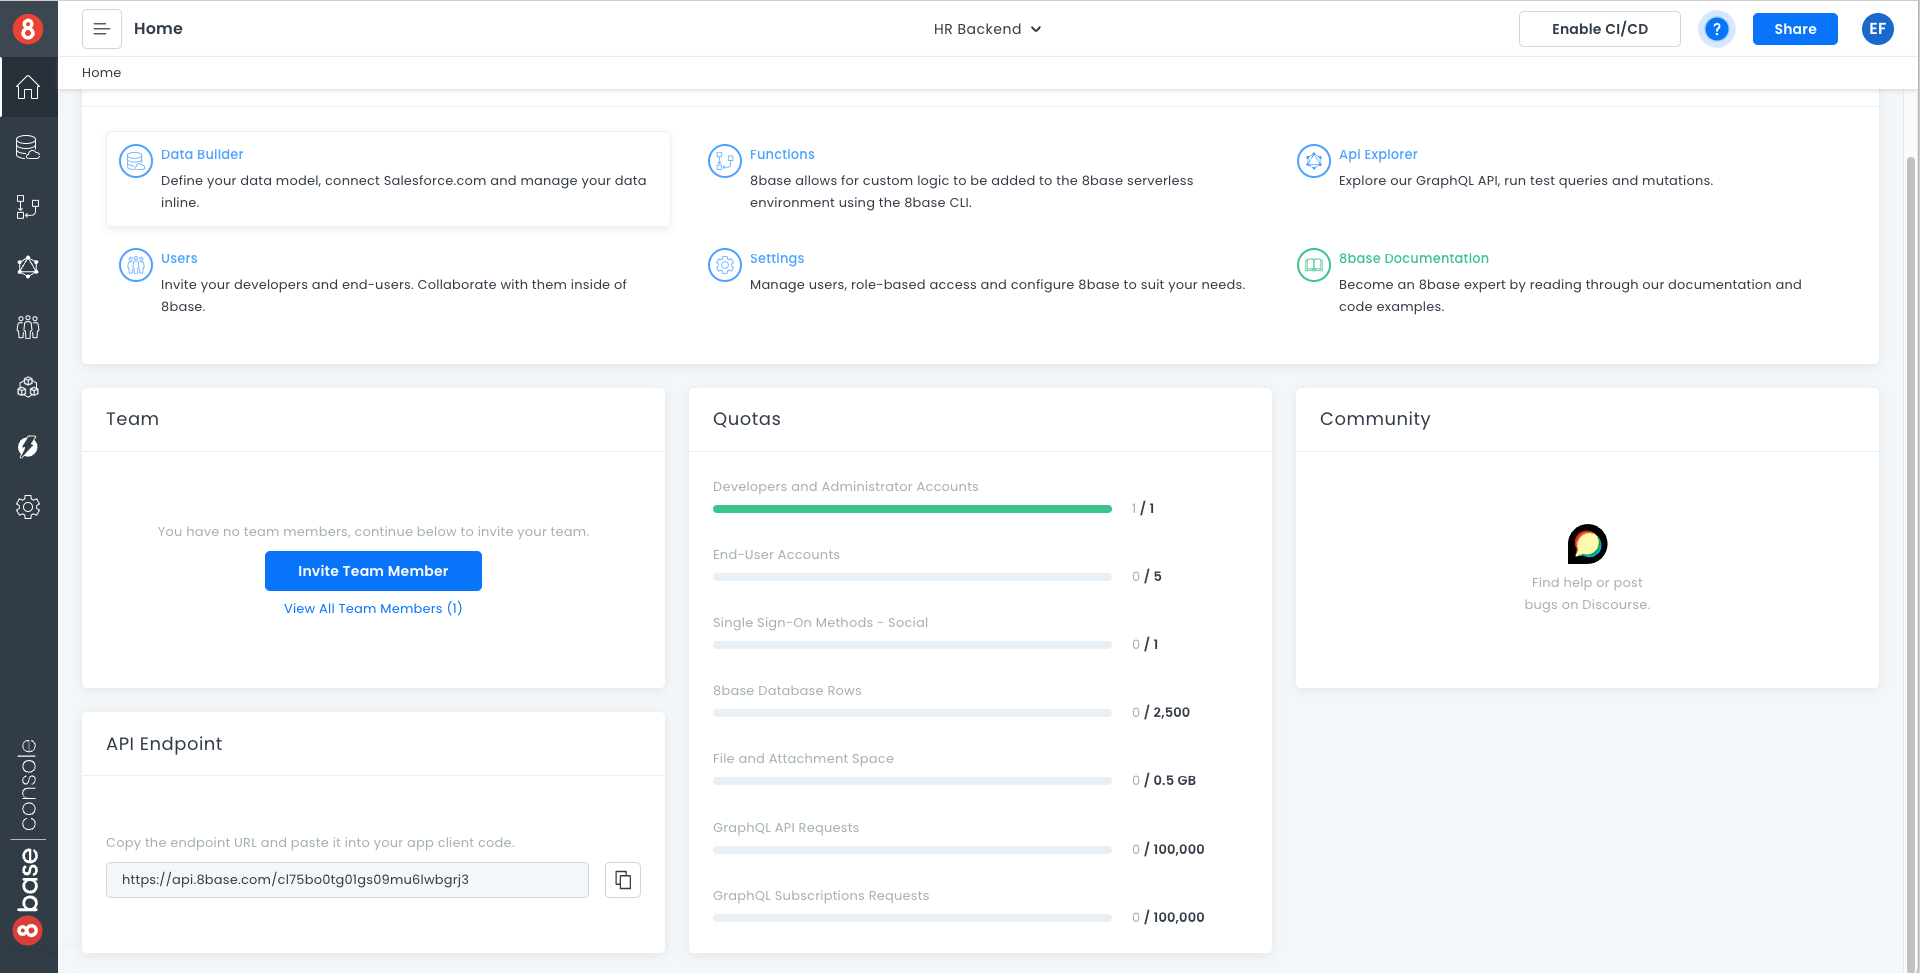 API Endpoint Workspace Dashboard